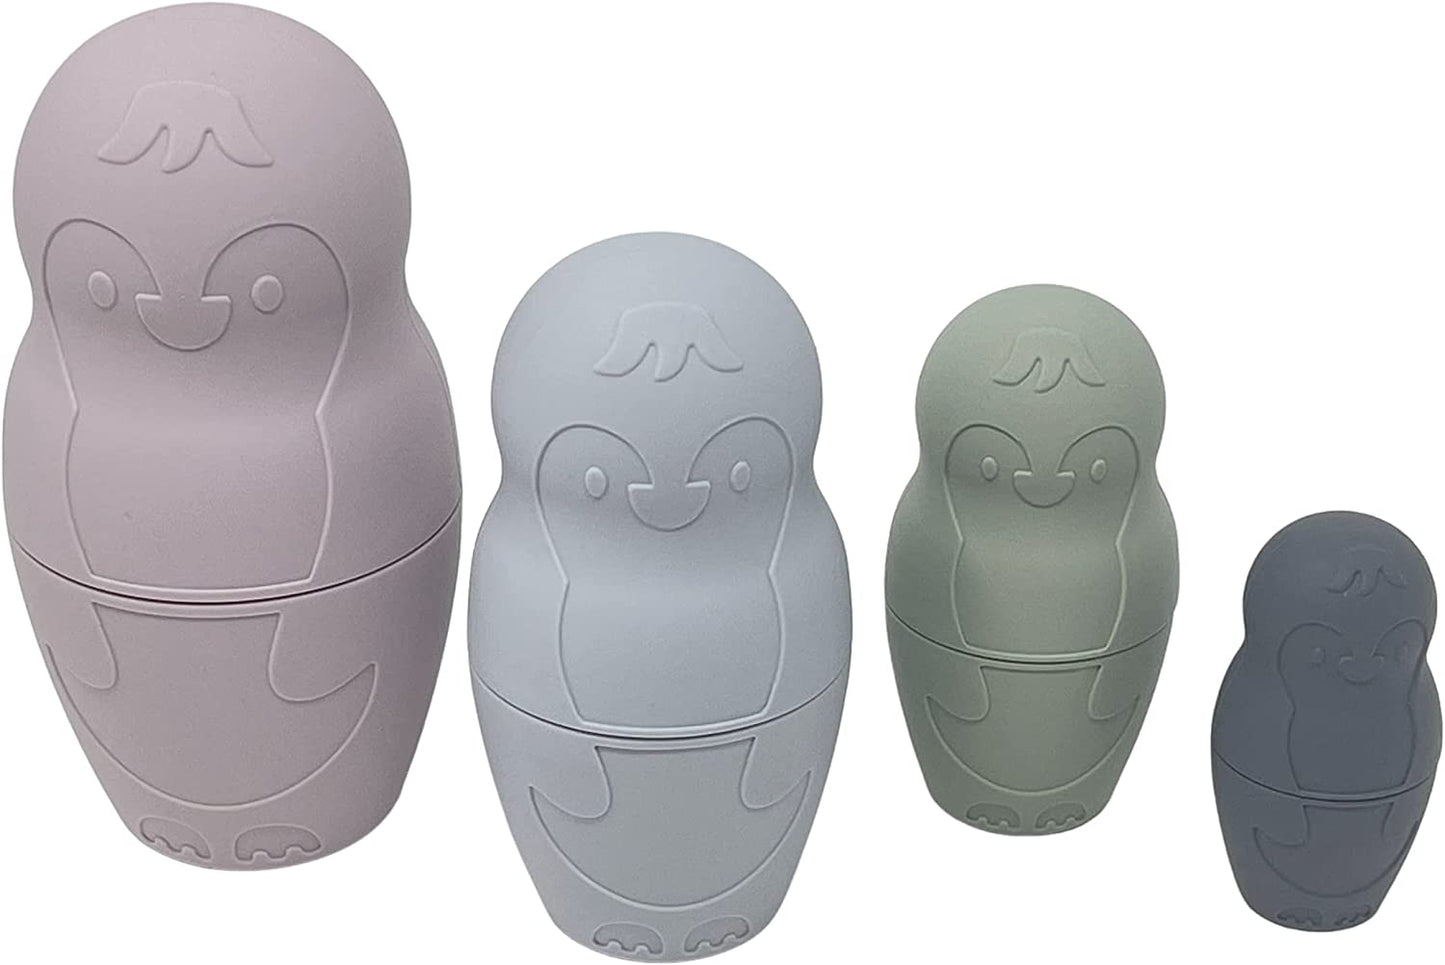 Puffy Penguins Toddler (1+) Silicone Stacking Nesting Dolls Toy : No Small Parts for Baby